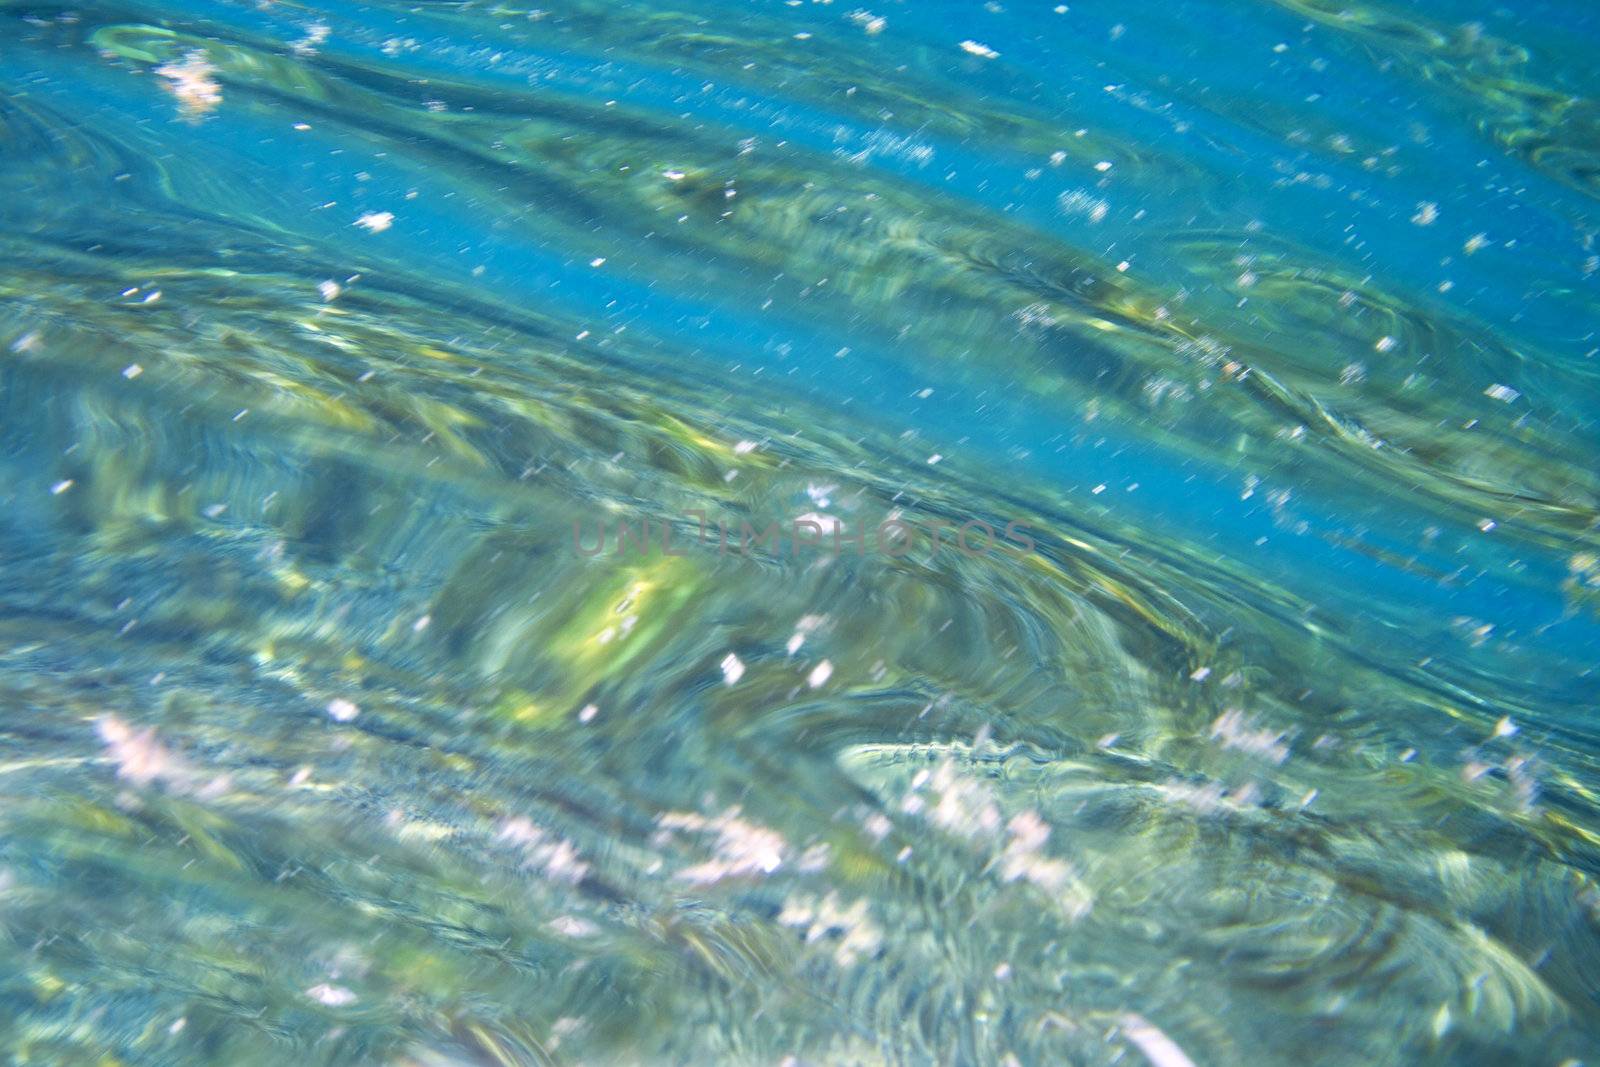 Seabed reflection on the water surface under water.